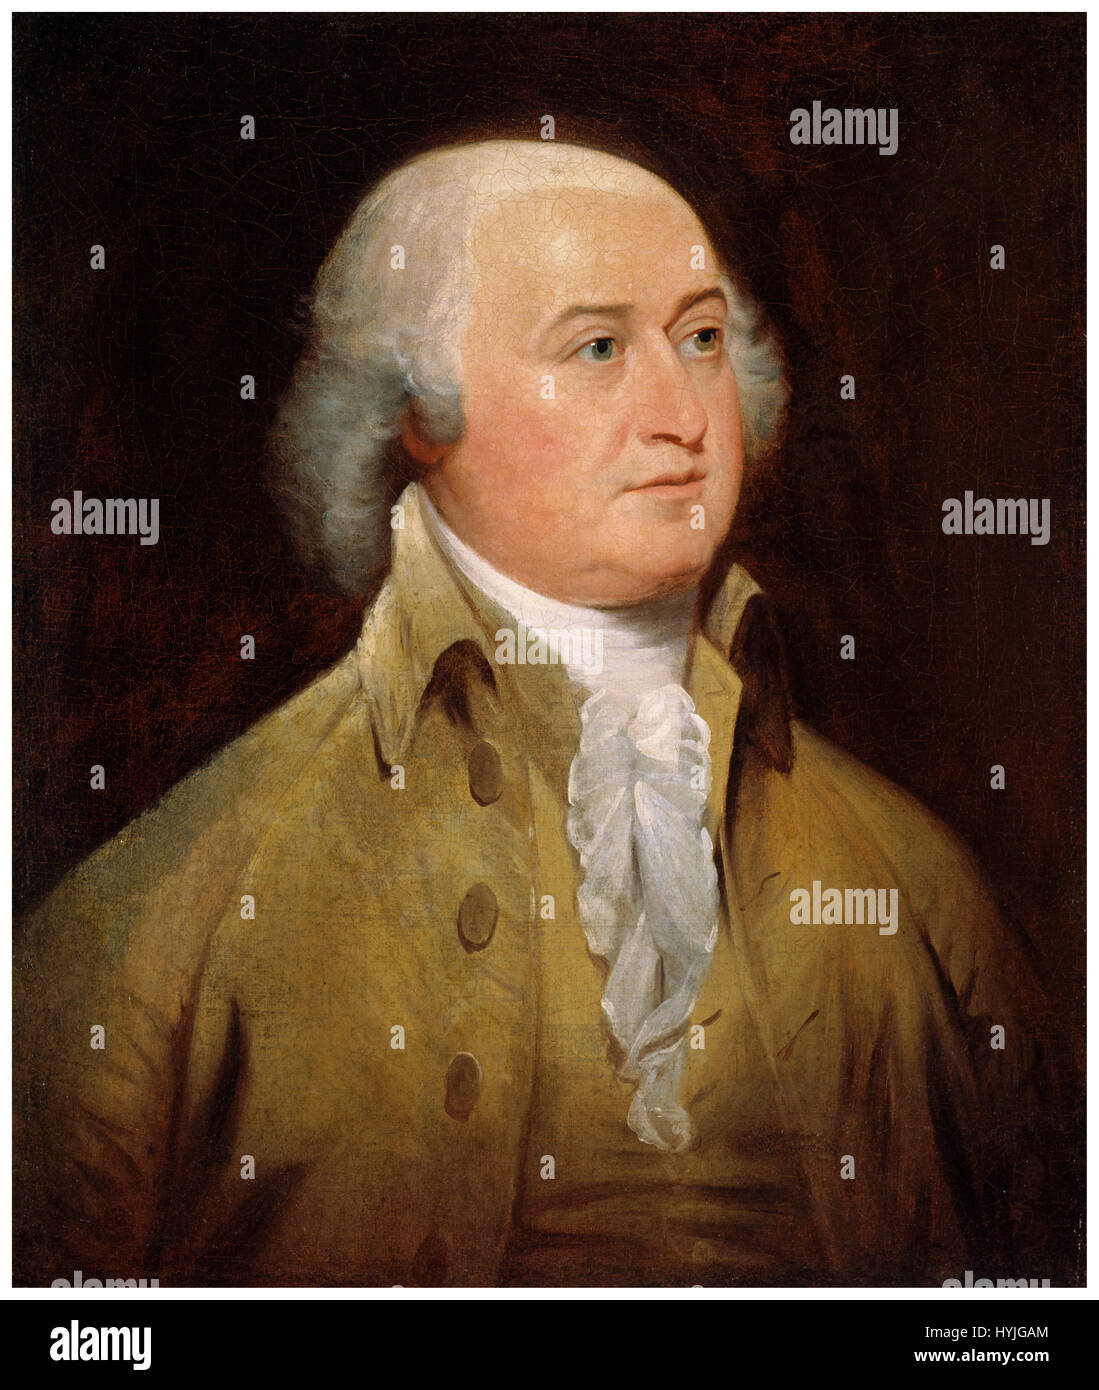 John Adams (30 October 1735 – 4 July 1826) was an American lawyer,author, statesman, and diplomat. He served as the second President of the United States (1797–1801), the first Vice President (1789–1797), and as a Founding Father was a leader of American independence from Great Britain. Stock Photo